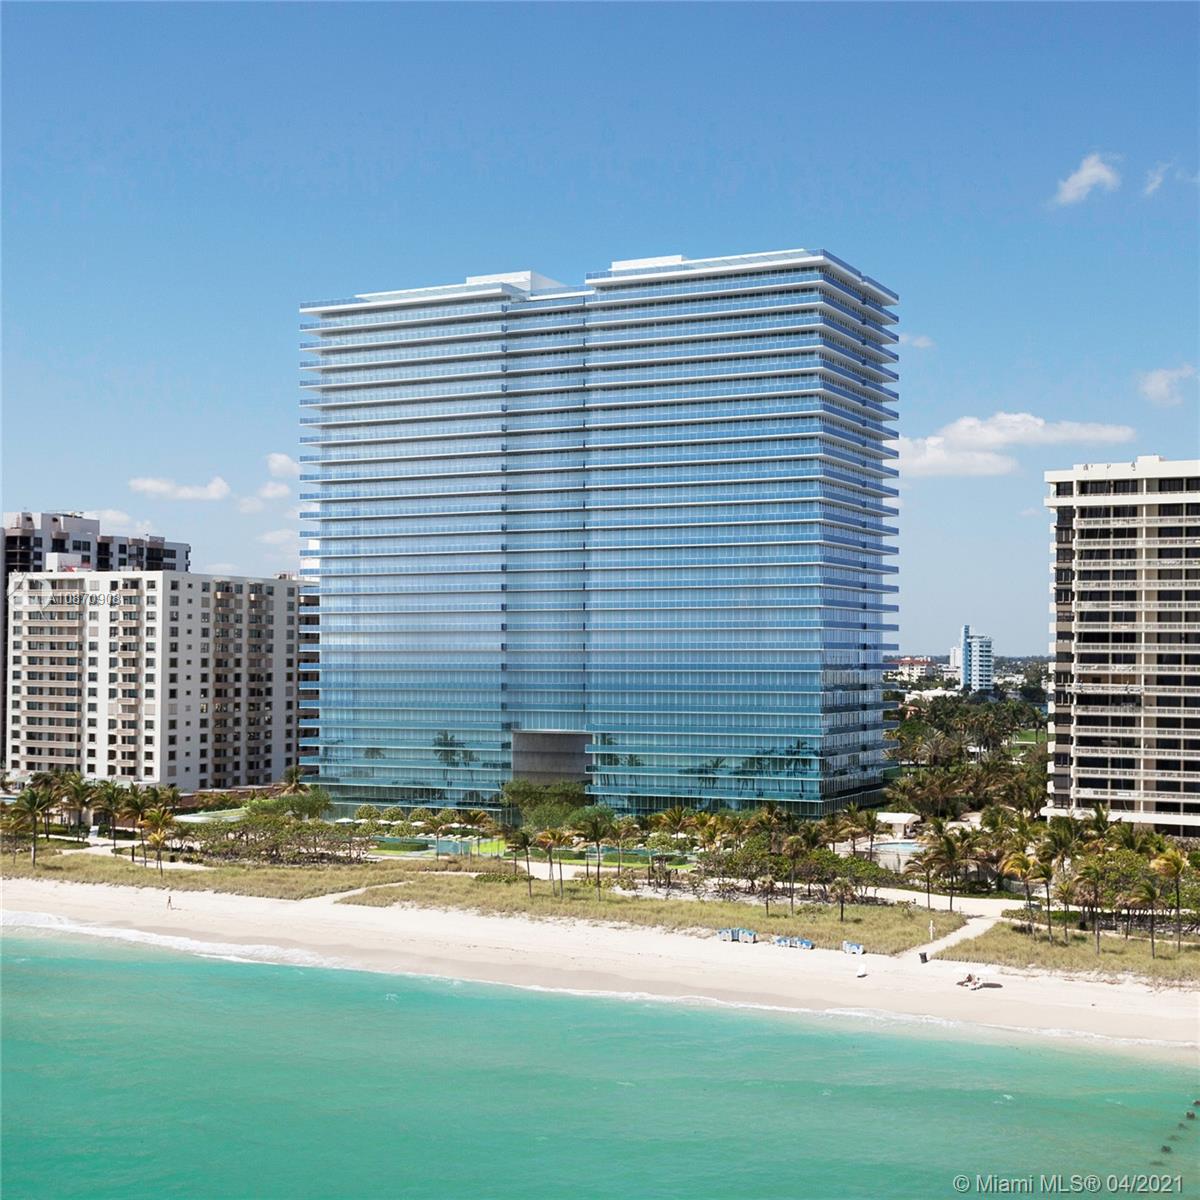 PH01N at Oceana Bal Harbour - Amazing Penthouse, 7,700 Sq Ft under AC, gorgeous unobstructed views of Ocean and Bay. A unique corner unit with wrap-around terrace and amazing interior space, featuring 11 ft height ceilings, Decorator-Ready, bathrooms & kitchen finished with Calacata and Carrara marble throughout.  Beach & pool service, private restaurant, gym, Pilates room, spa, pet spa, semi-Olympic lap pool and recreational pool, two jacuzzis, two tennis clay-courts, movie theatre, playroom for kids, party room, billiard room, 4 car garage and storage. Oceana Bal Harbour has an impressive art collection including two sculptures from American artist Jeff Koons, who holds the record for the highest price paid for an artwork by a living artist.